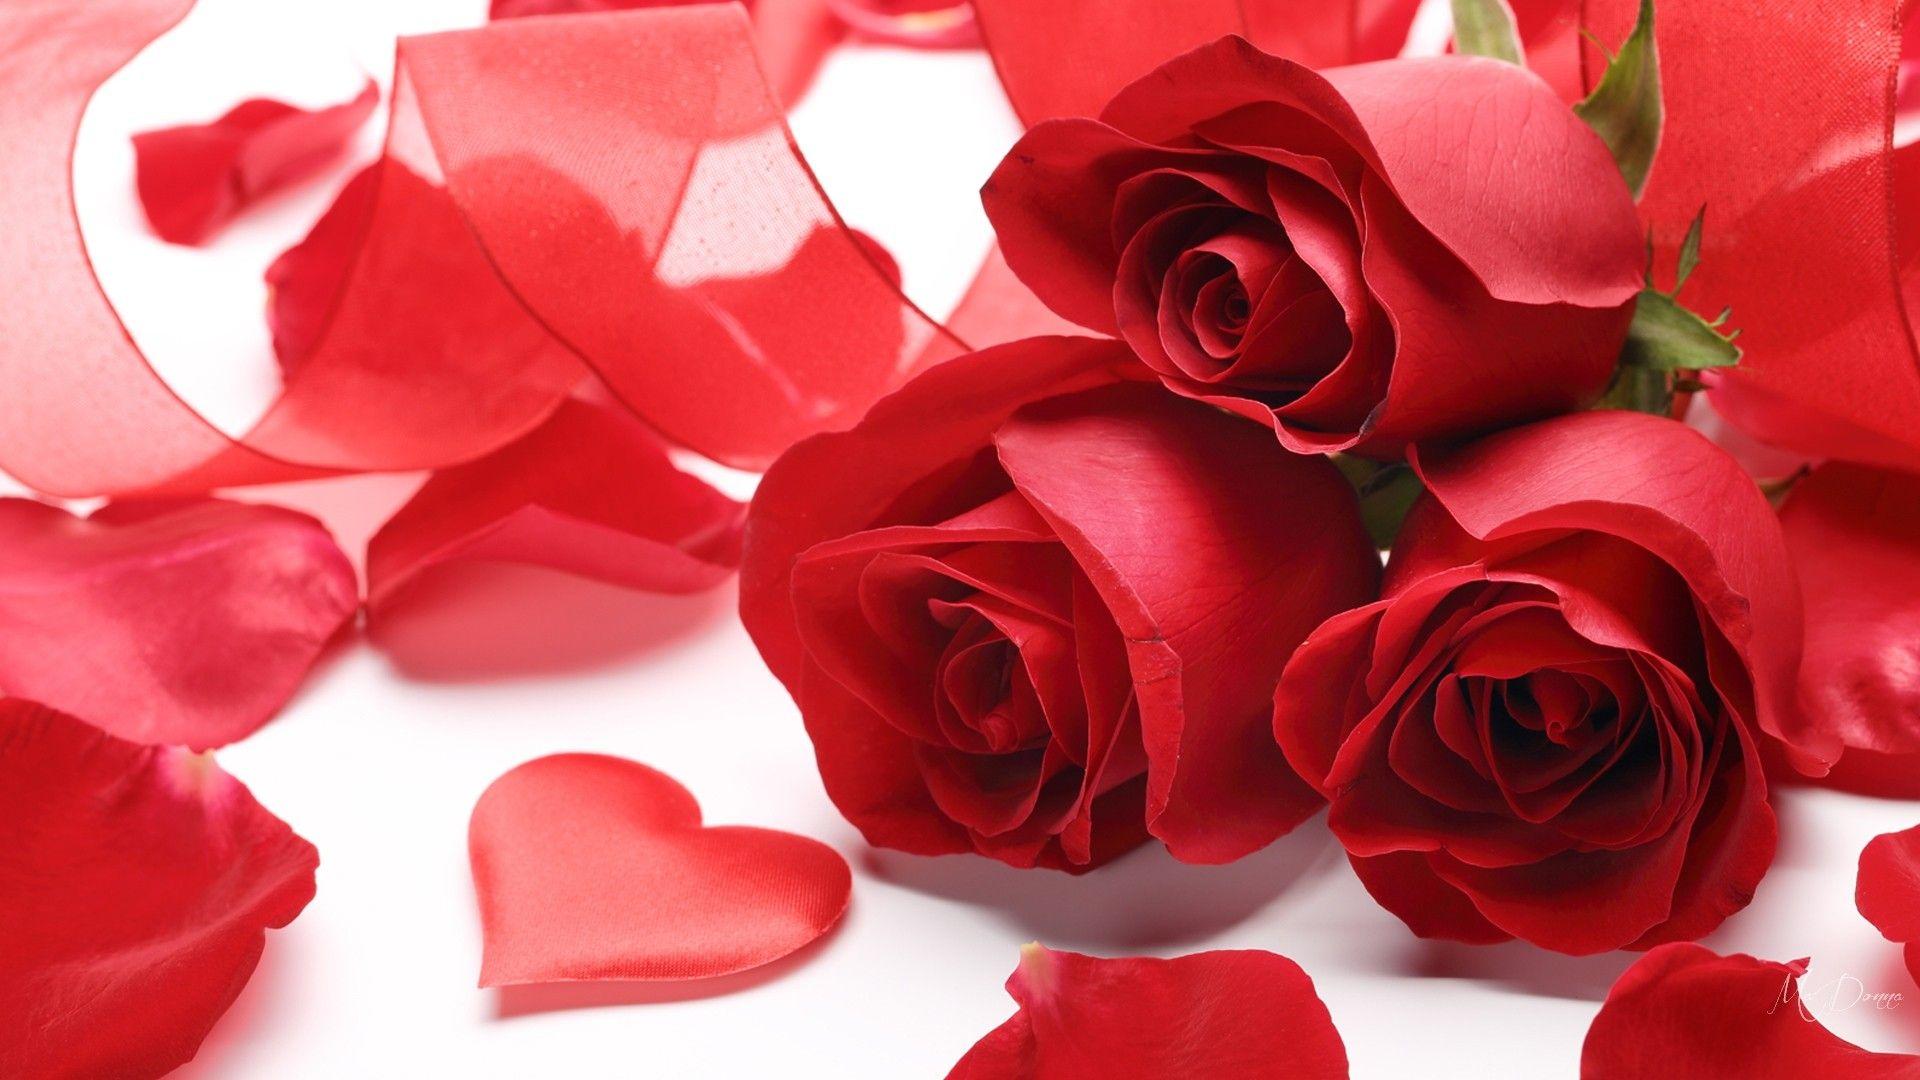 Flowers: Hearts Day Red Roses Flowers Valentines Petals Tropical